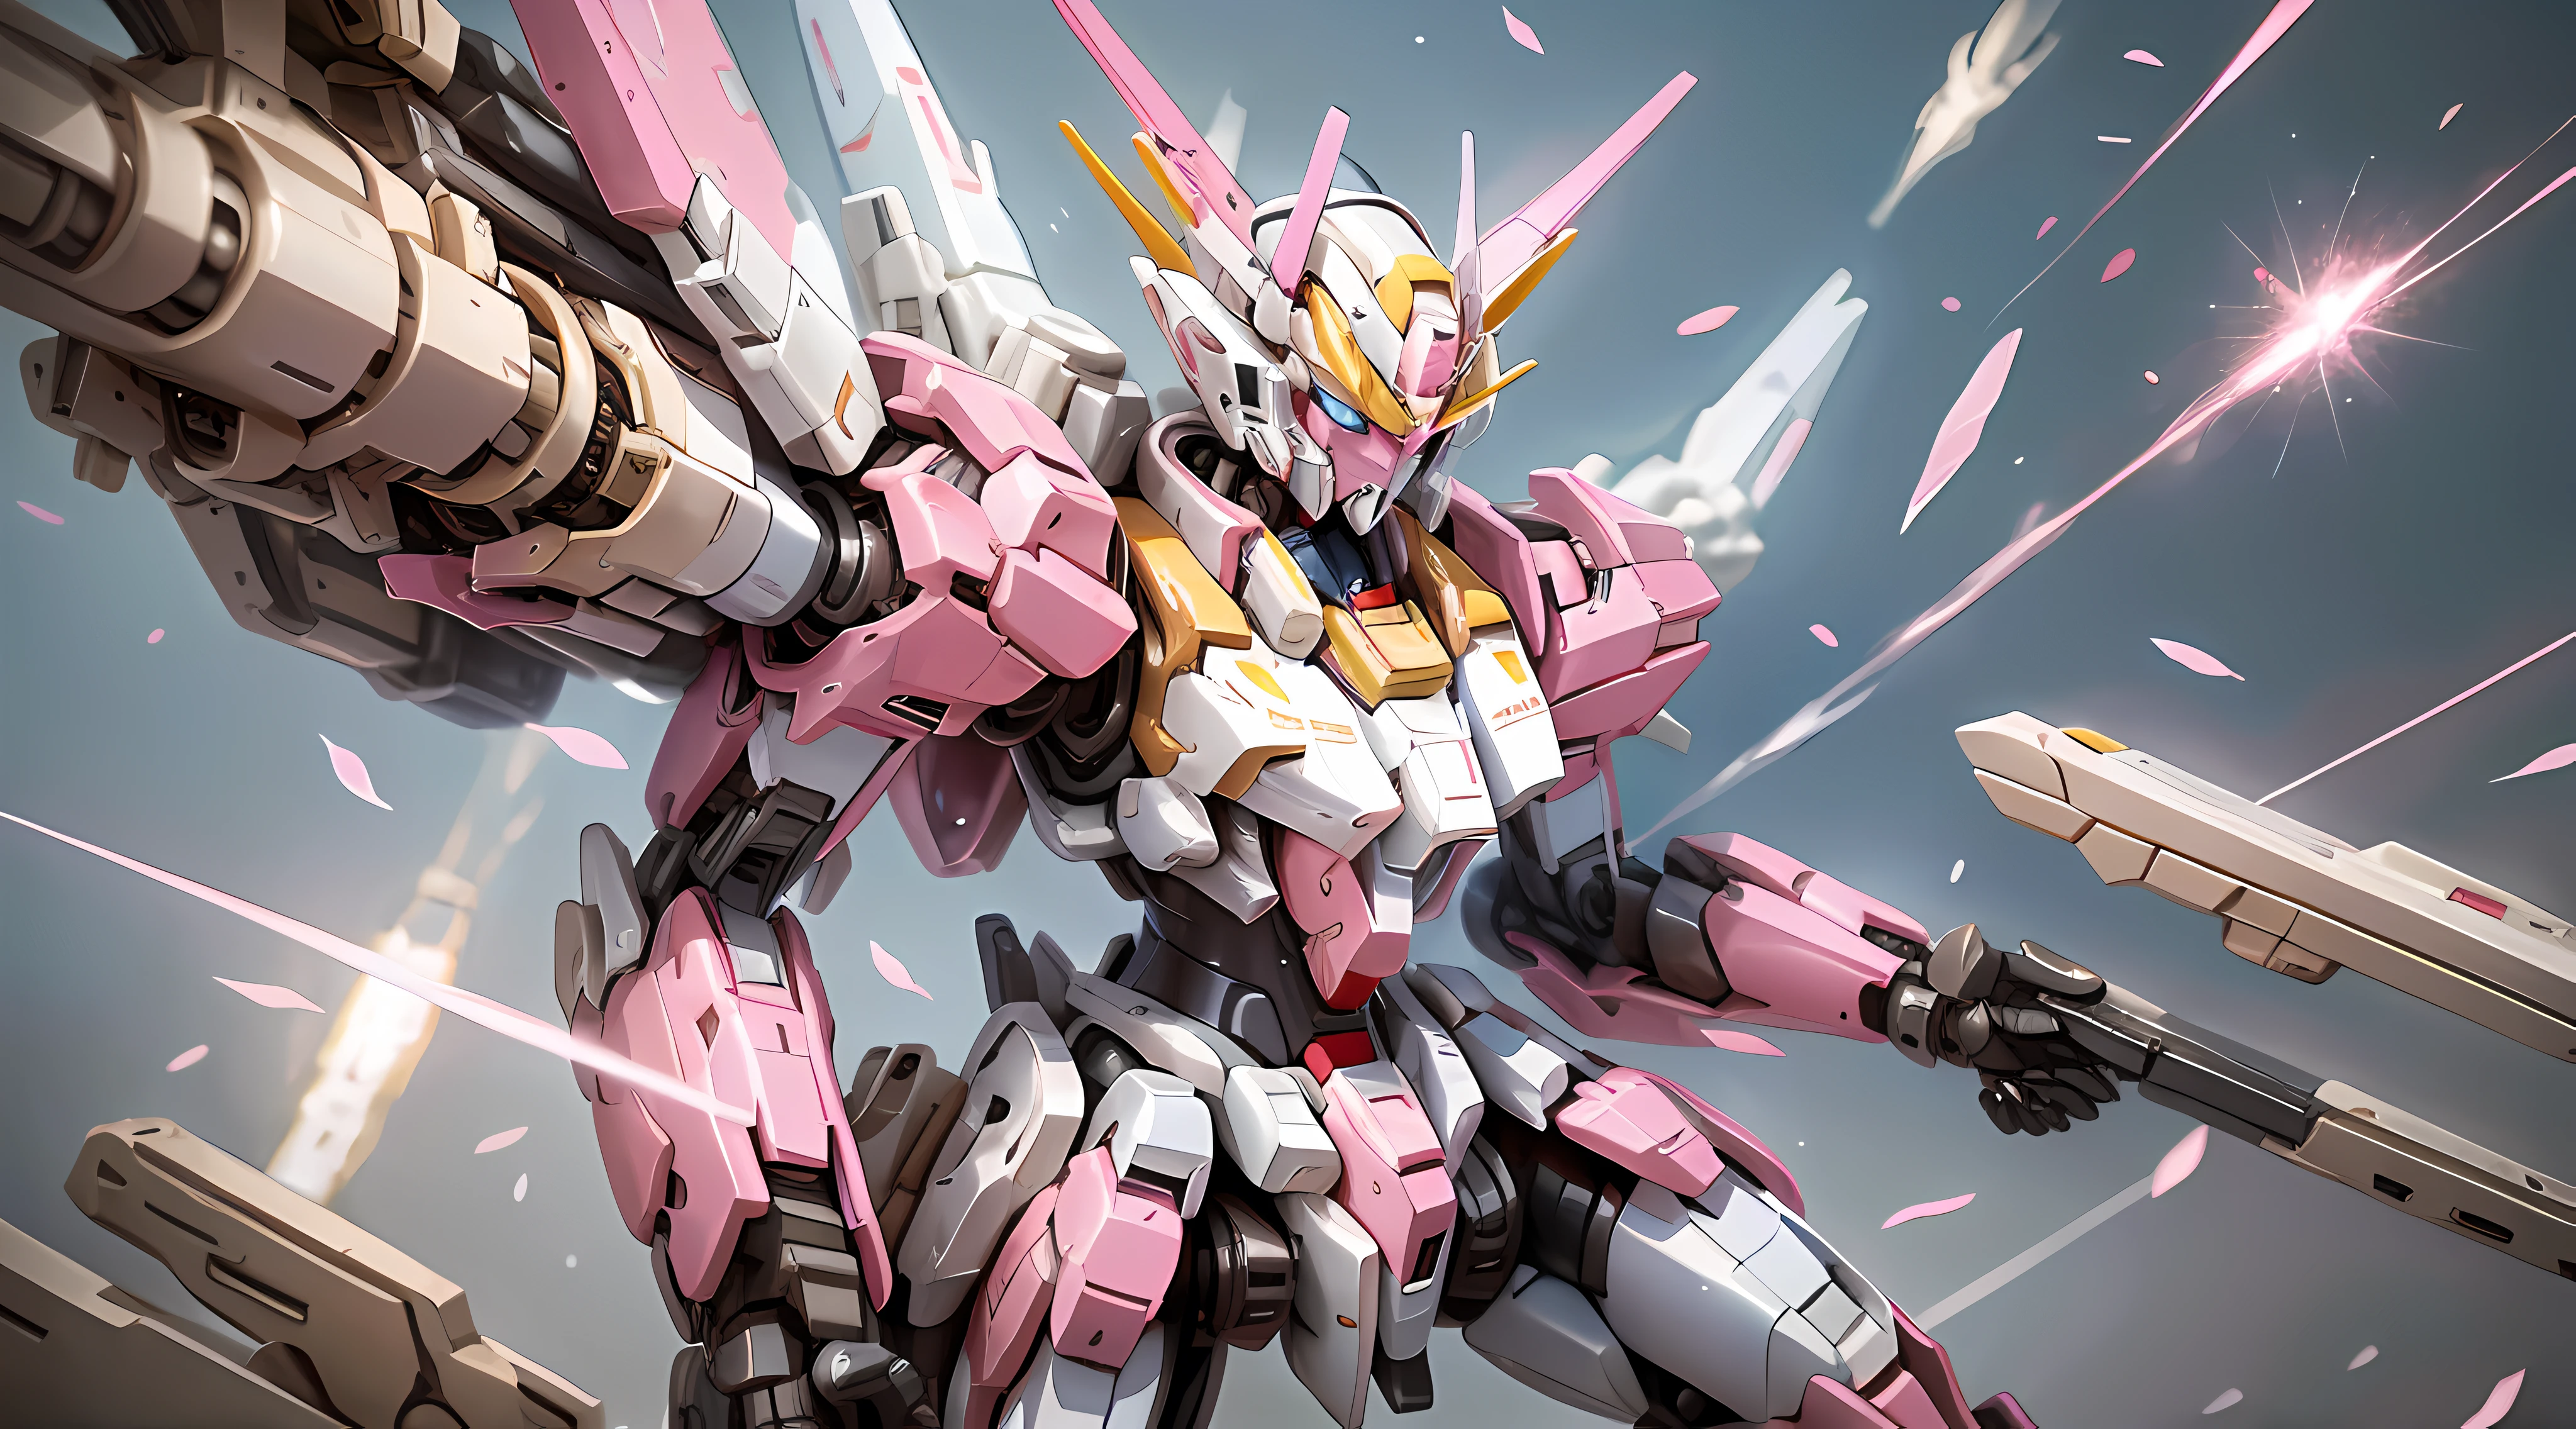 Gundam in pink and white porcelain, porcelain material, precision mech parts